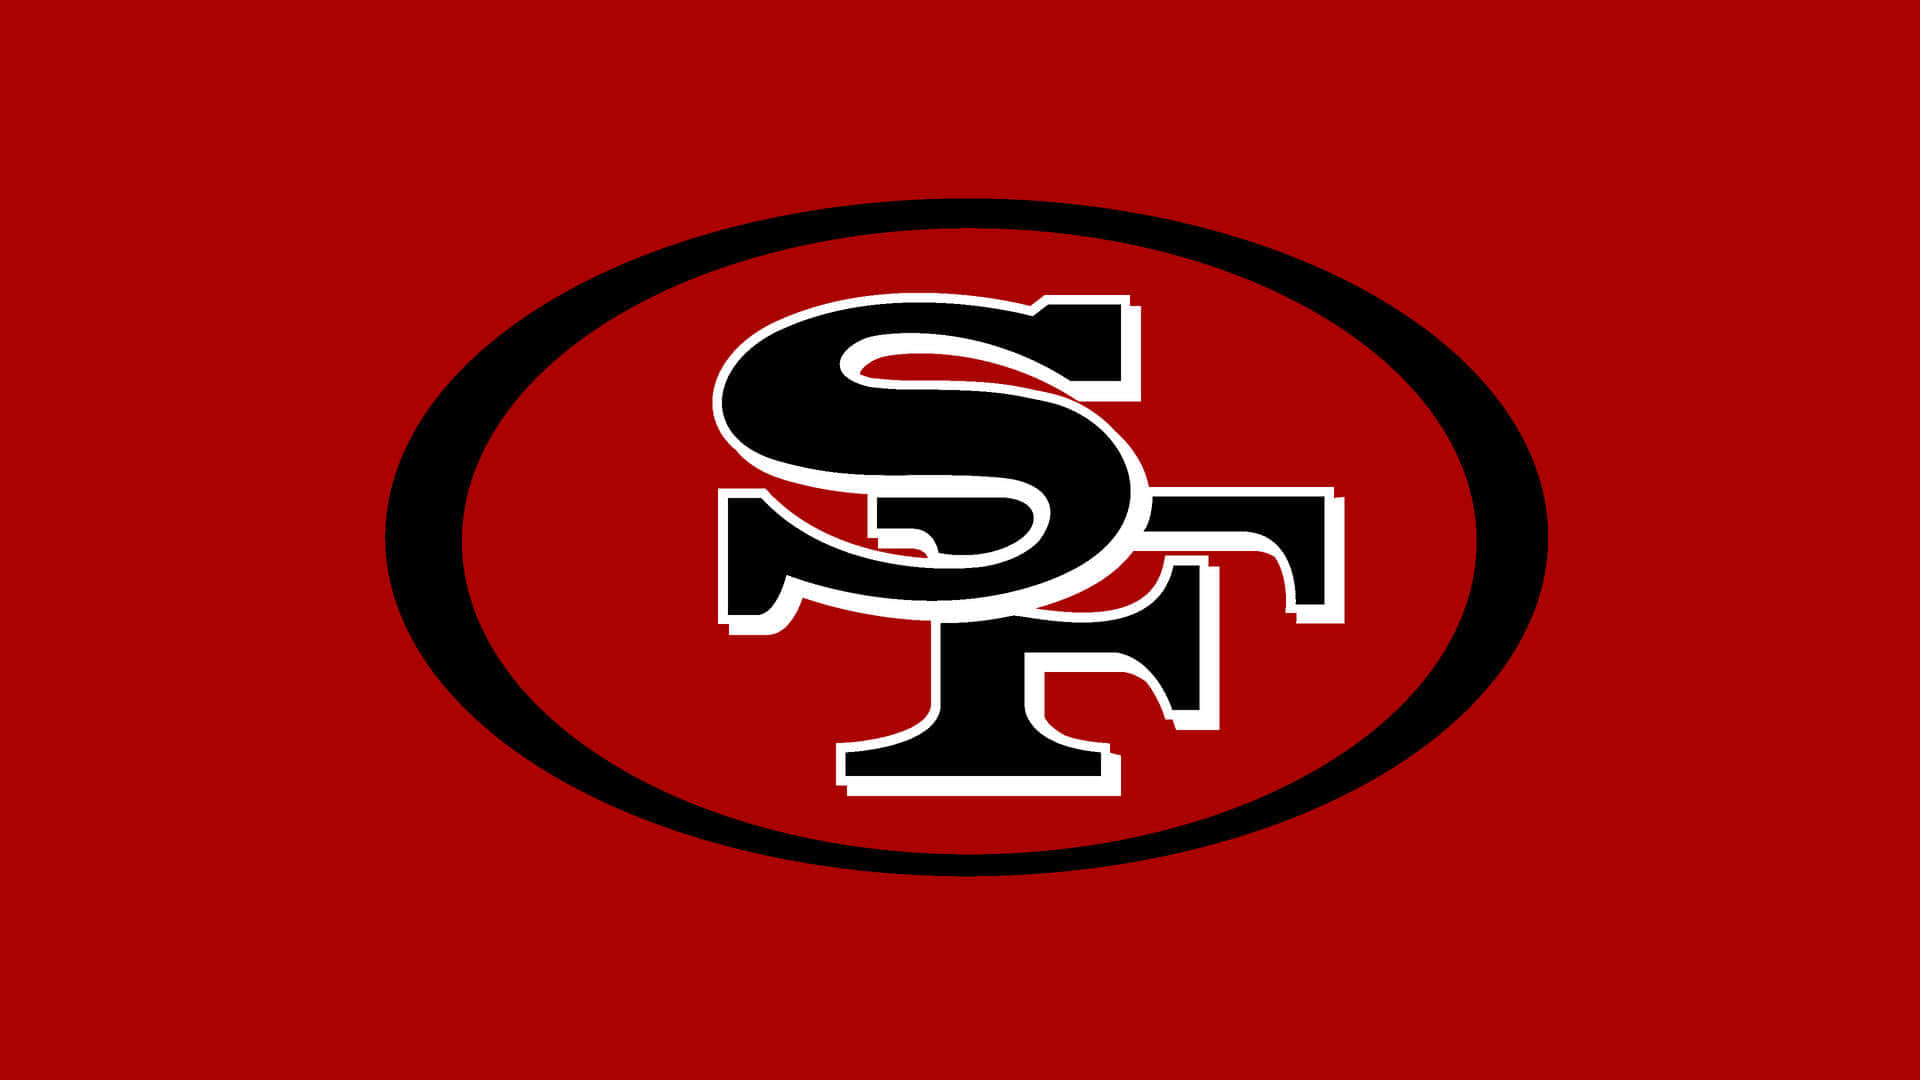 The San Francisco 49ers | Champions of Super Bowl 54